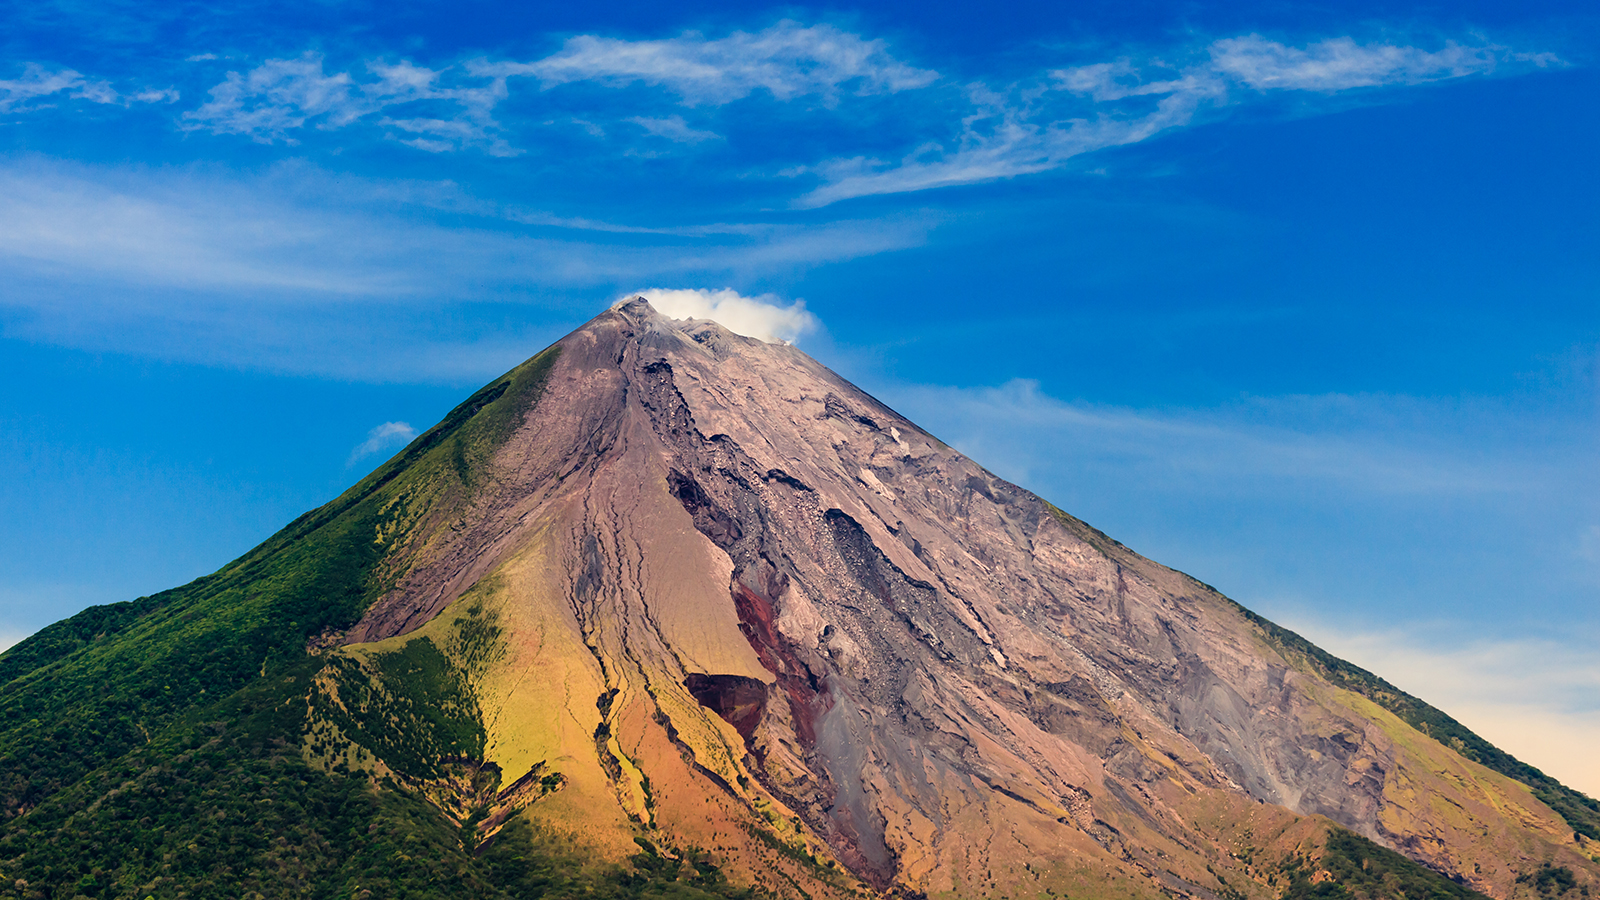 OMETEPE, NICARAGUA: View of Conception Volcano's colorful ash deposits and green slopes.; Shutterstock ID 101348698; PO: Kids Website for March; Job: Hillary Leo; Client: KIDS WEB